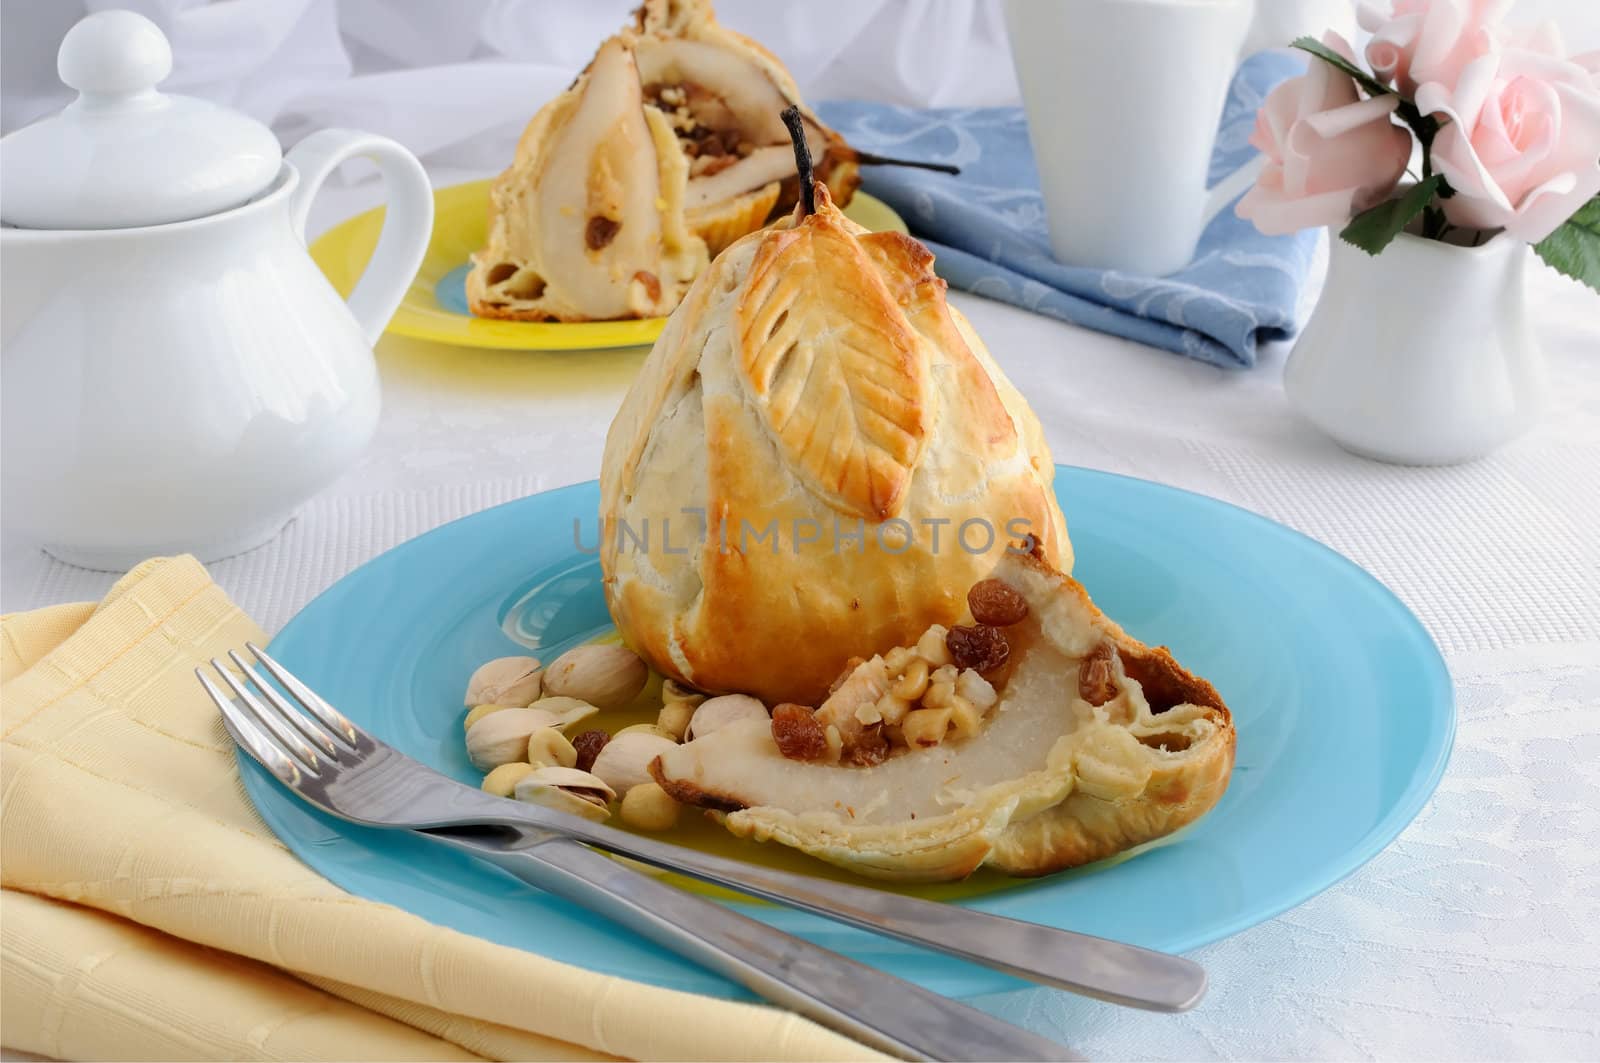 Baked pears stuffed with a mixture of nuts and raisins in the dough